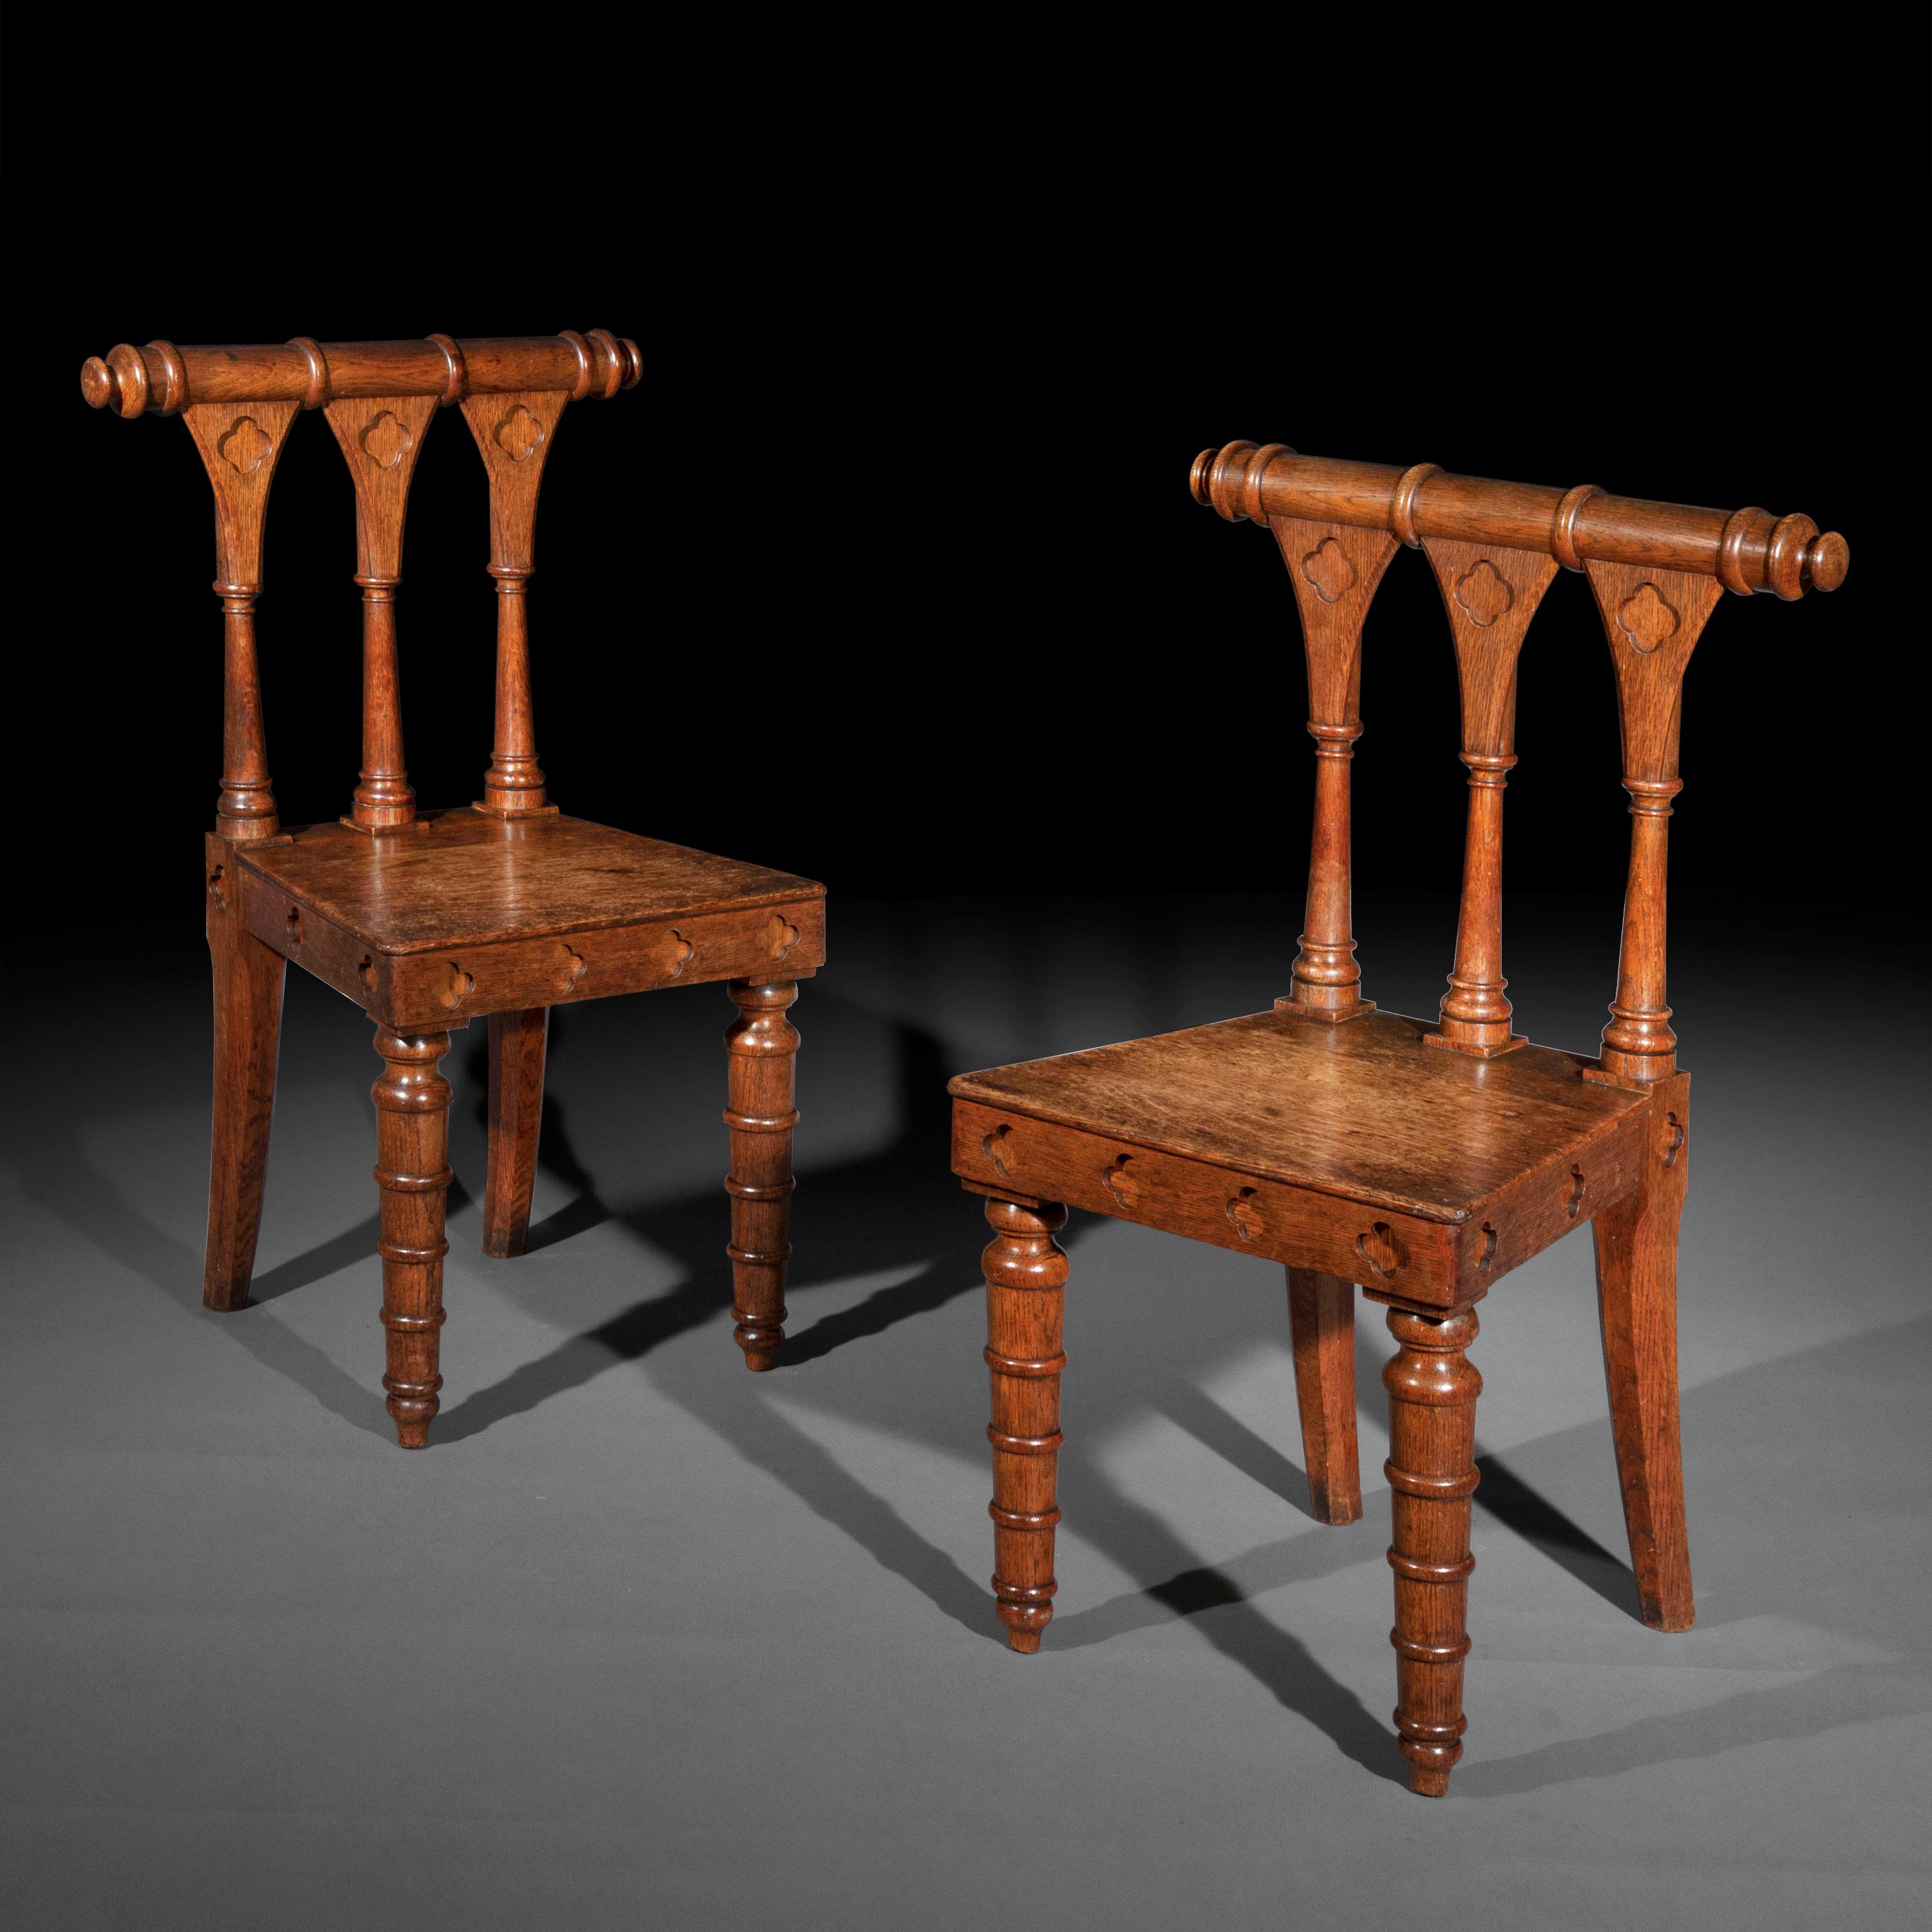 A pair of unusual oak hall chairs of the late Regency, in the manner of George Smith or Richard Bridgens.

England, circa 1825.

Why we like them

The architectural boldness and chunkiness of these hall chairs is highly unusual. Also of great colour